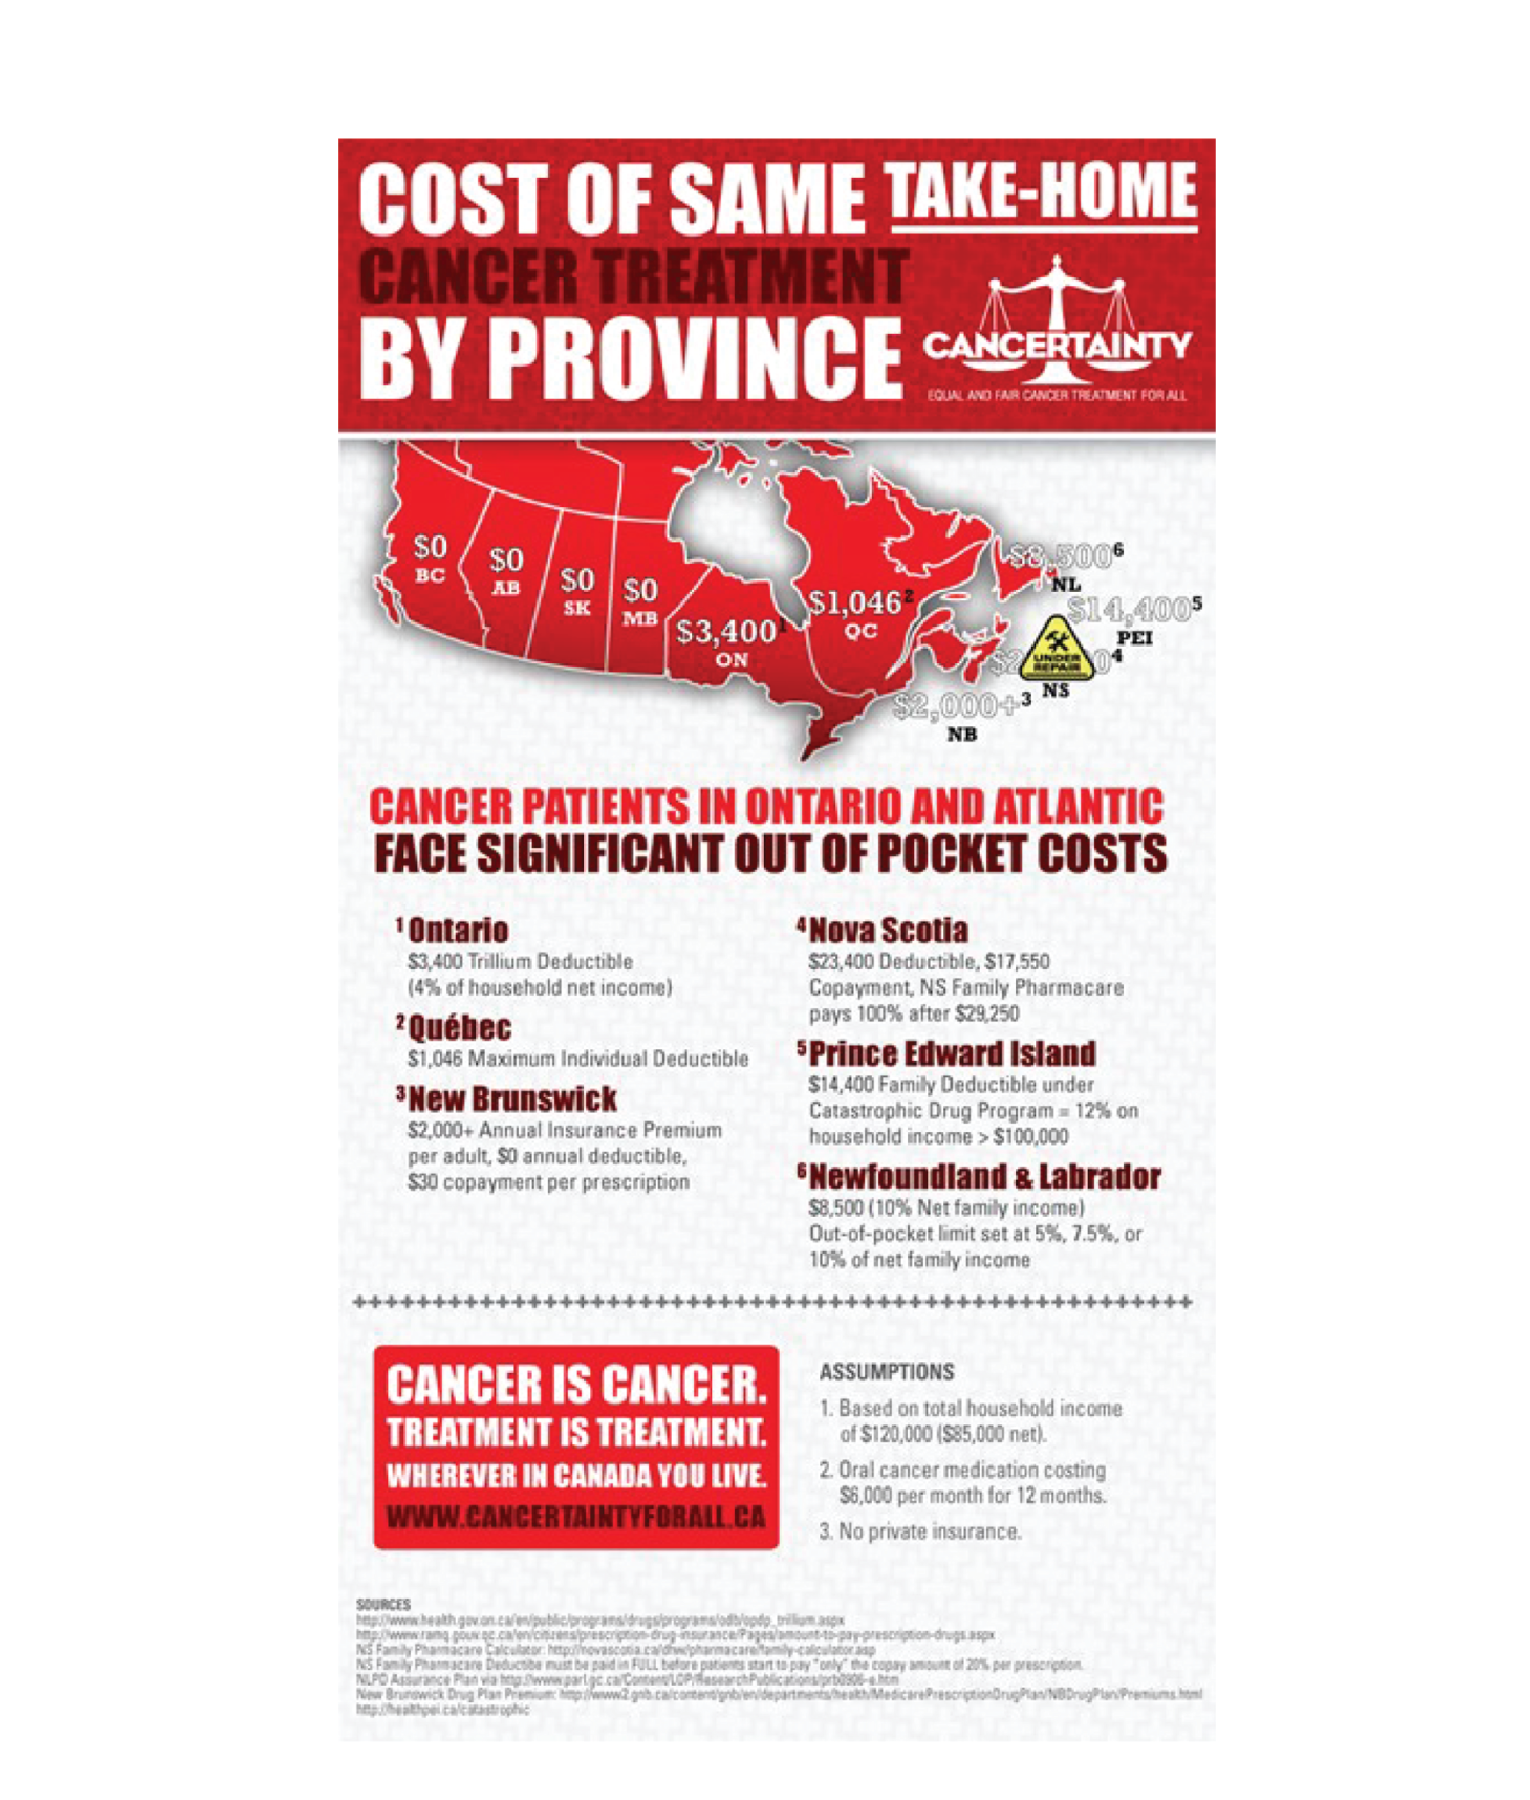 Graphic of Canada showing the cost of treatment in each province. Cancer patients in Ontario and the Atlantic provinces face significant out of pocket costs.